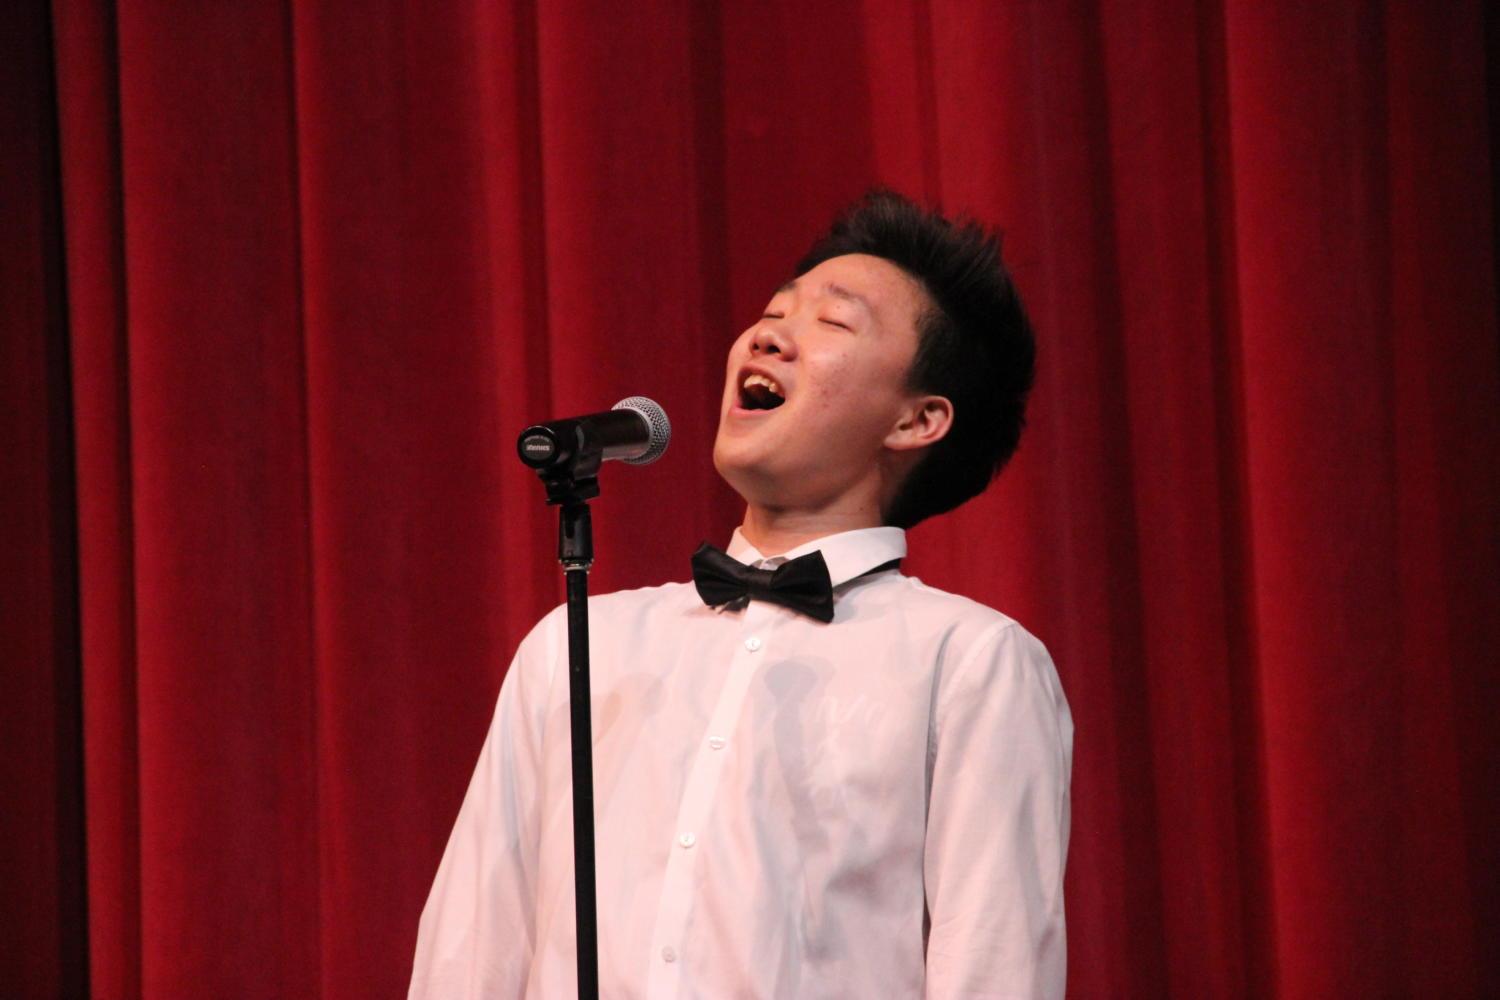 Coppell High School senior Daniel Kim sings during Vivace! on Friday evening. Kim plans to continue his music career in college, where he will major in music in worship at Baylor University.